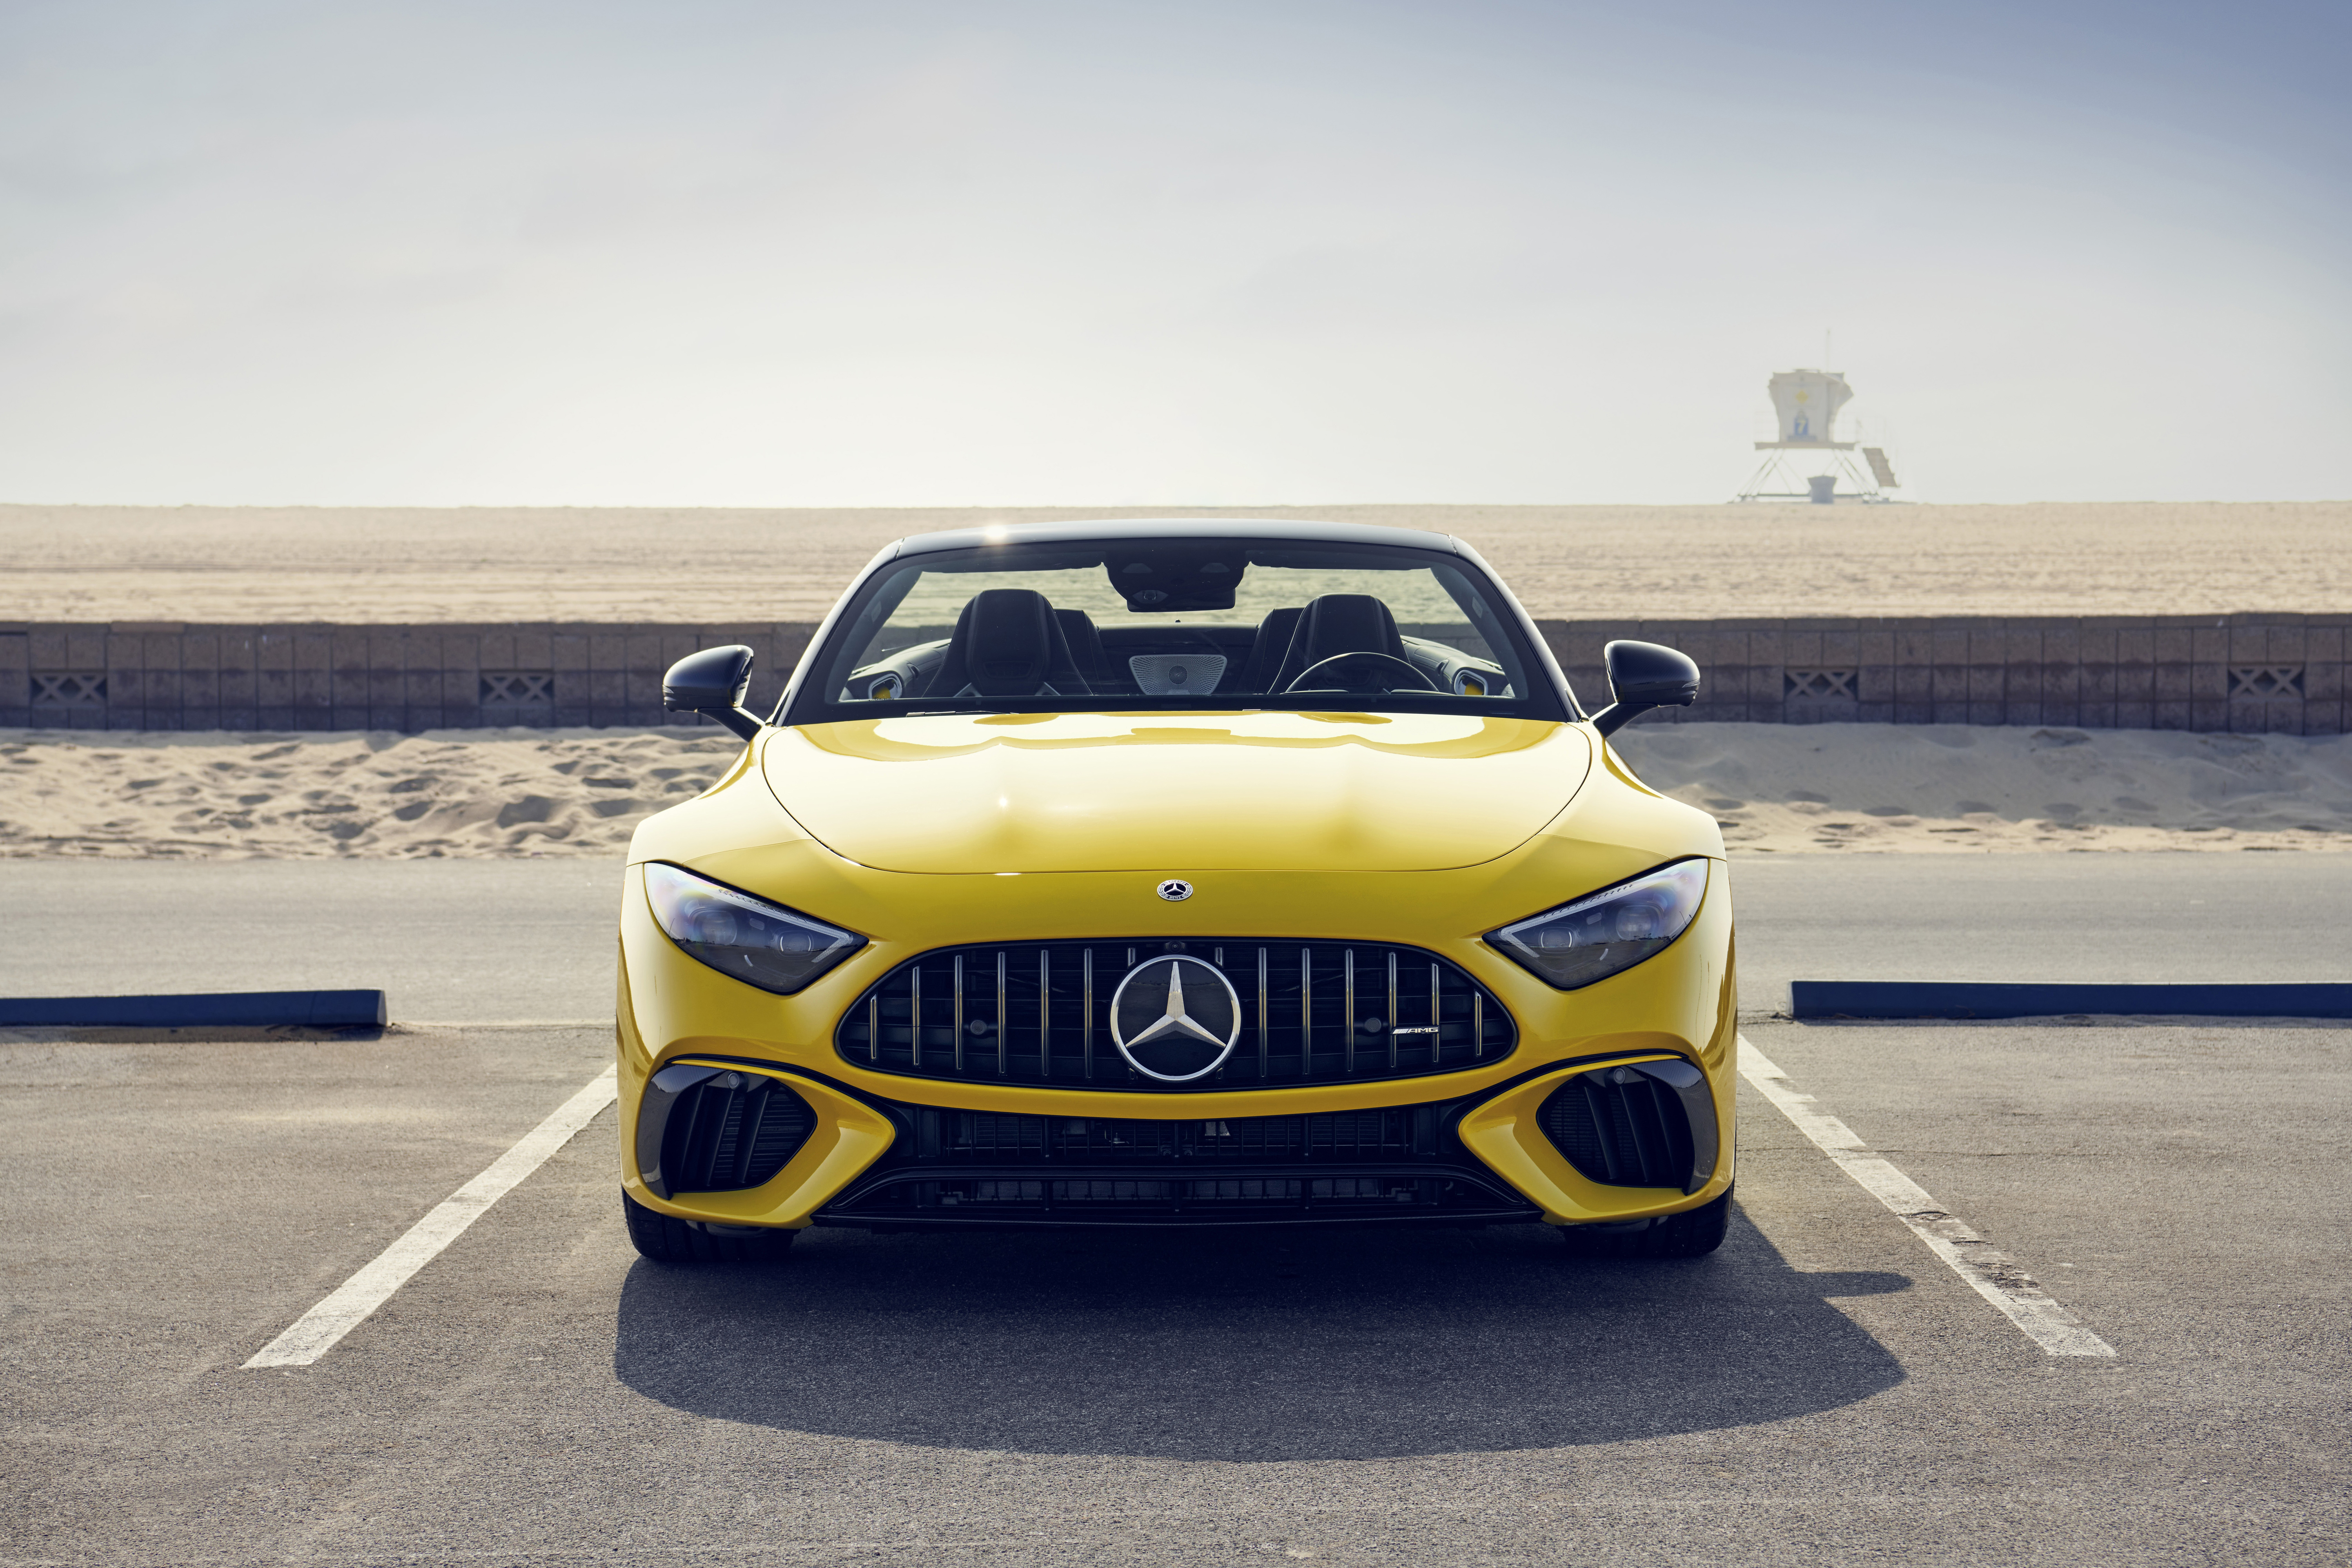 Mercedes-Amg Sl Wallpapers